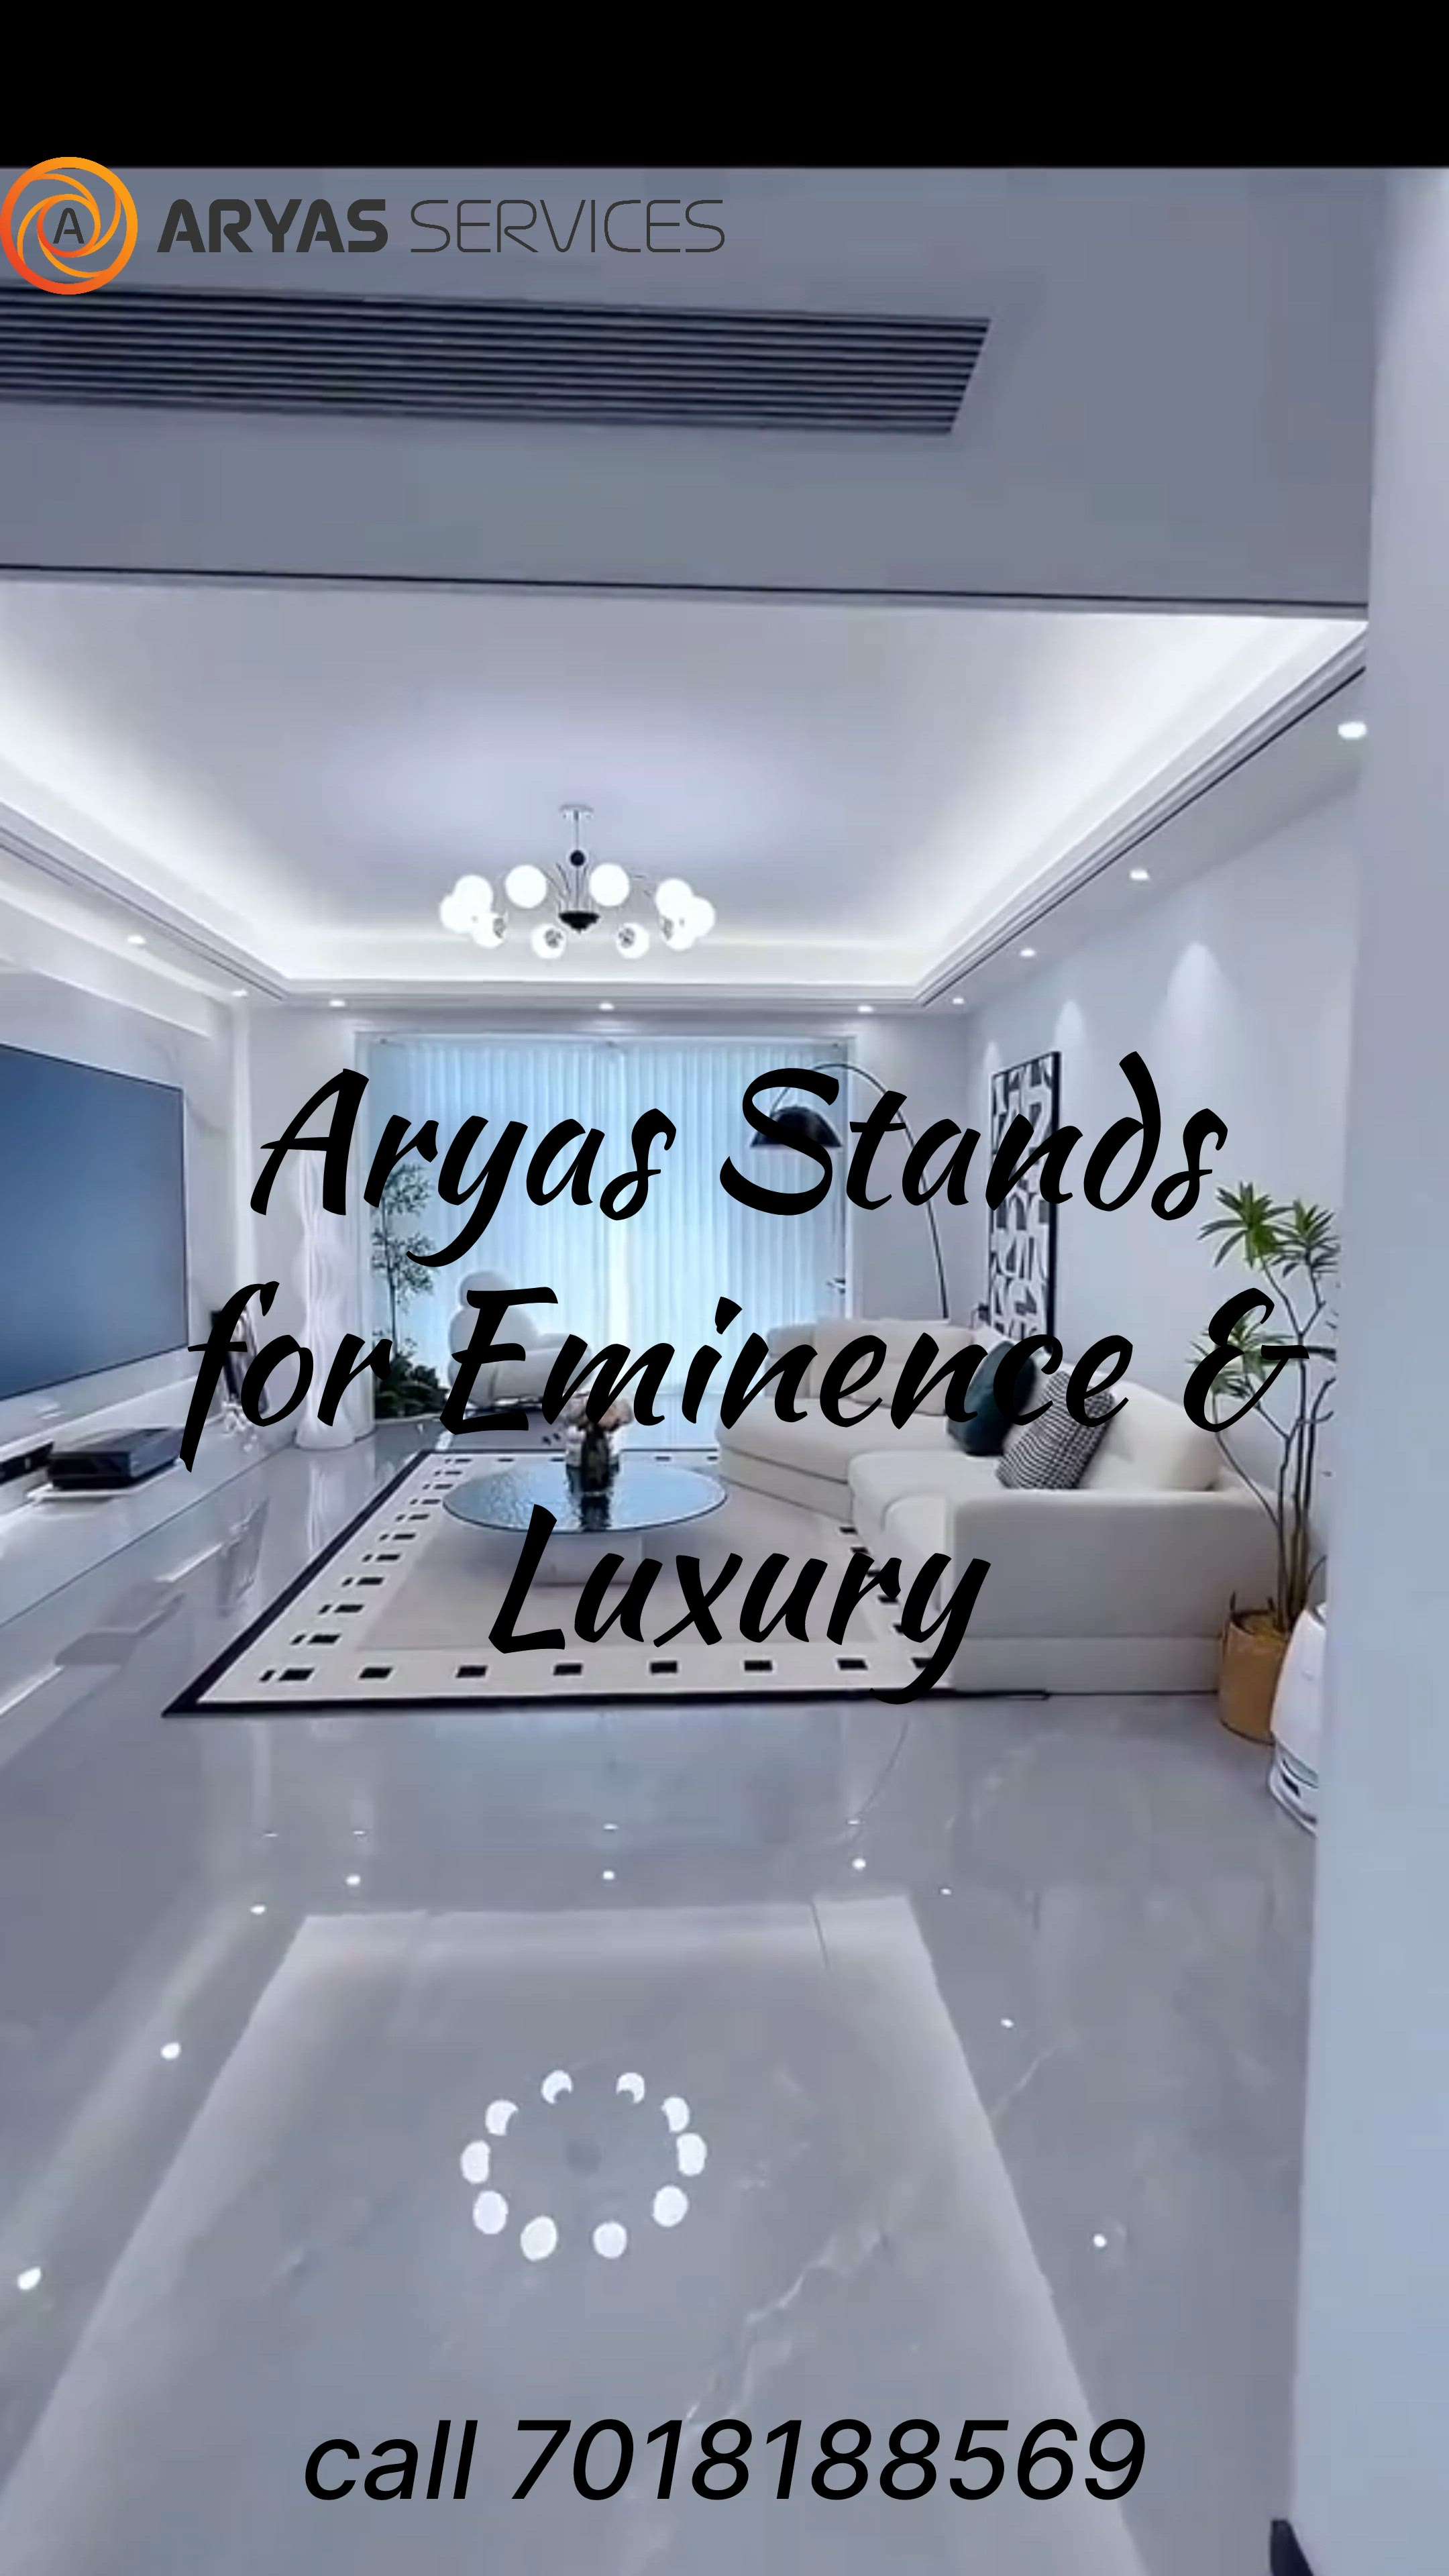 luxury flat interiors services by Aryas interio & Infra Services,
Provide complete end to end Professional Construction & interior Services in Delhi Ncr, Gurugram, Ghaziabad, Noida, Greater Noida, Faridabad, chandigarh, Manali and Shimla. Contact us right now for any interior or renovation work, call us @ +91-7018188569 &
Visit our website at www.designinterios.com
office address sector 100 noida
Follow us on Instagram #aryasinterio and Facebook @aryasinterio .
#uttarpradesh #construction_himachal
#noidainterior #noida #delhincr #delhi #Delhihome  #noidaconstruction #interiordesign #interior #interiors #interiordesigner #interiordecor #interiorstyling #delhiinteriors #greaternoida #faridabad #ghaziabadinterior #ghaziabad  #chandigarh